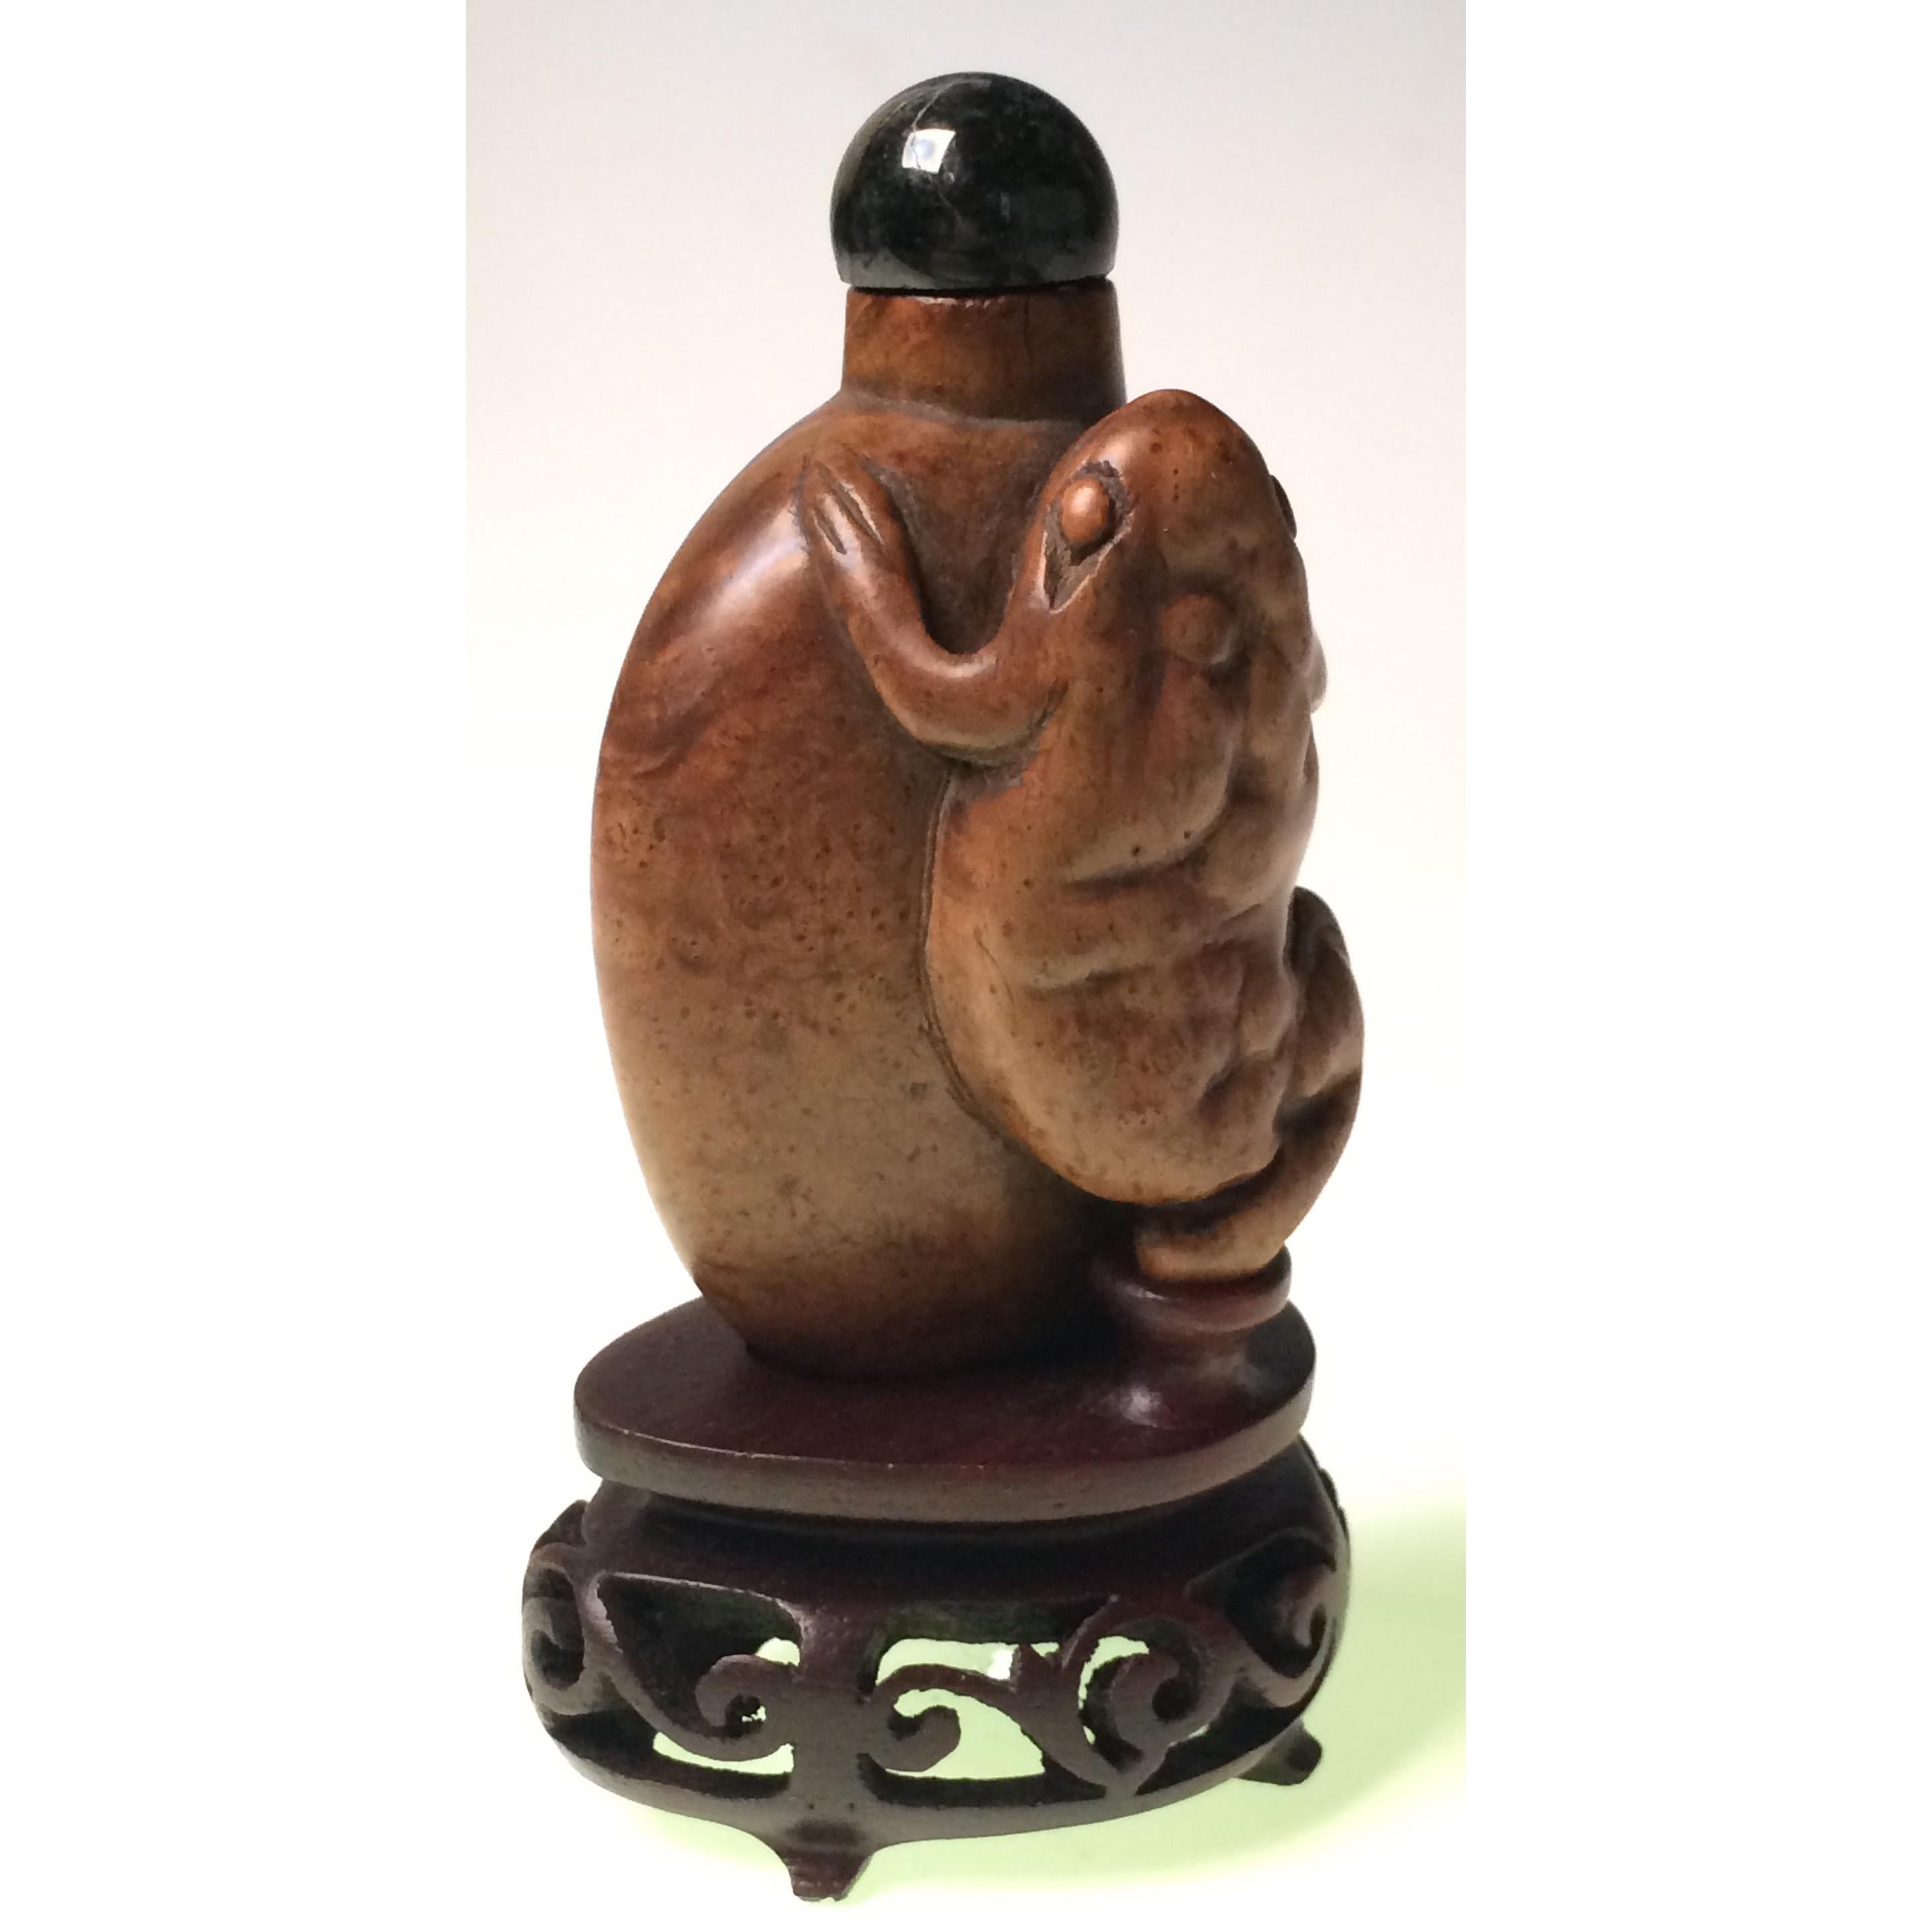 Antique Chinese burl wood snuff bottle with a large three legged toad on the front in high relief, overall oval shape with oval foot rim and countersunk flat base, adequately hollowed, small round neck, jade stopper, stained and carved organic